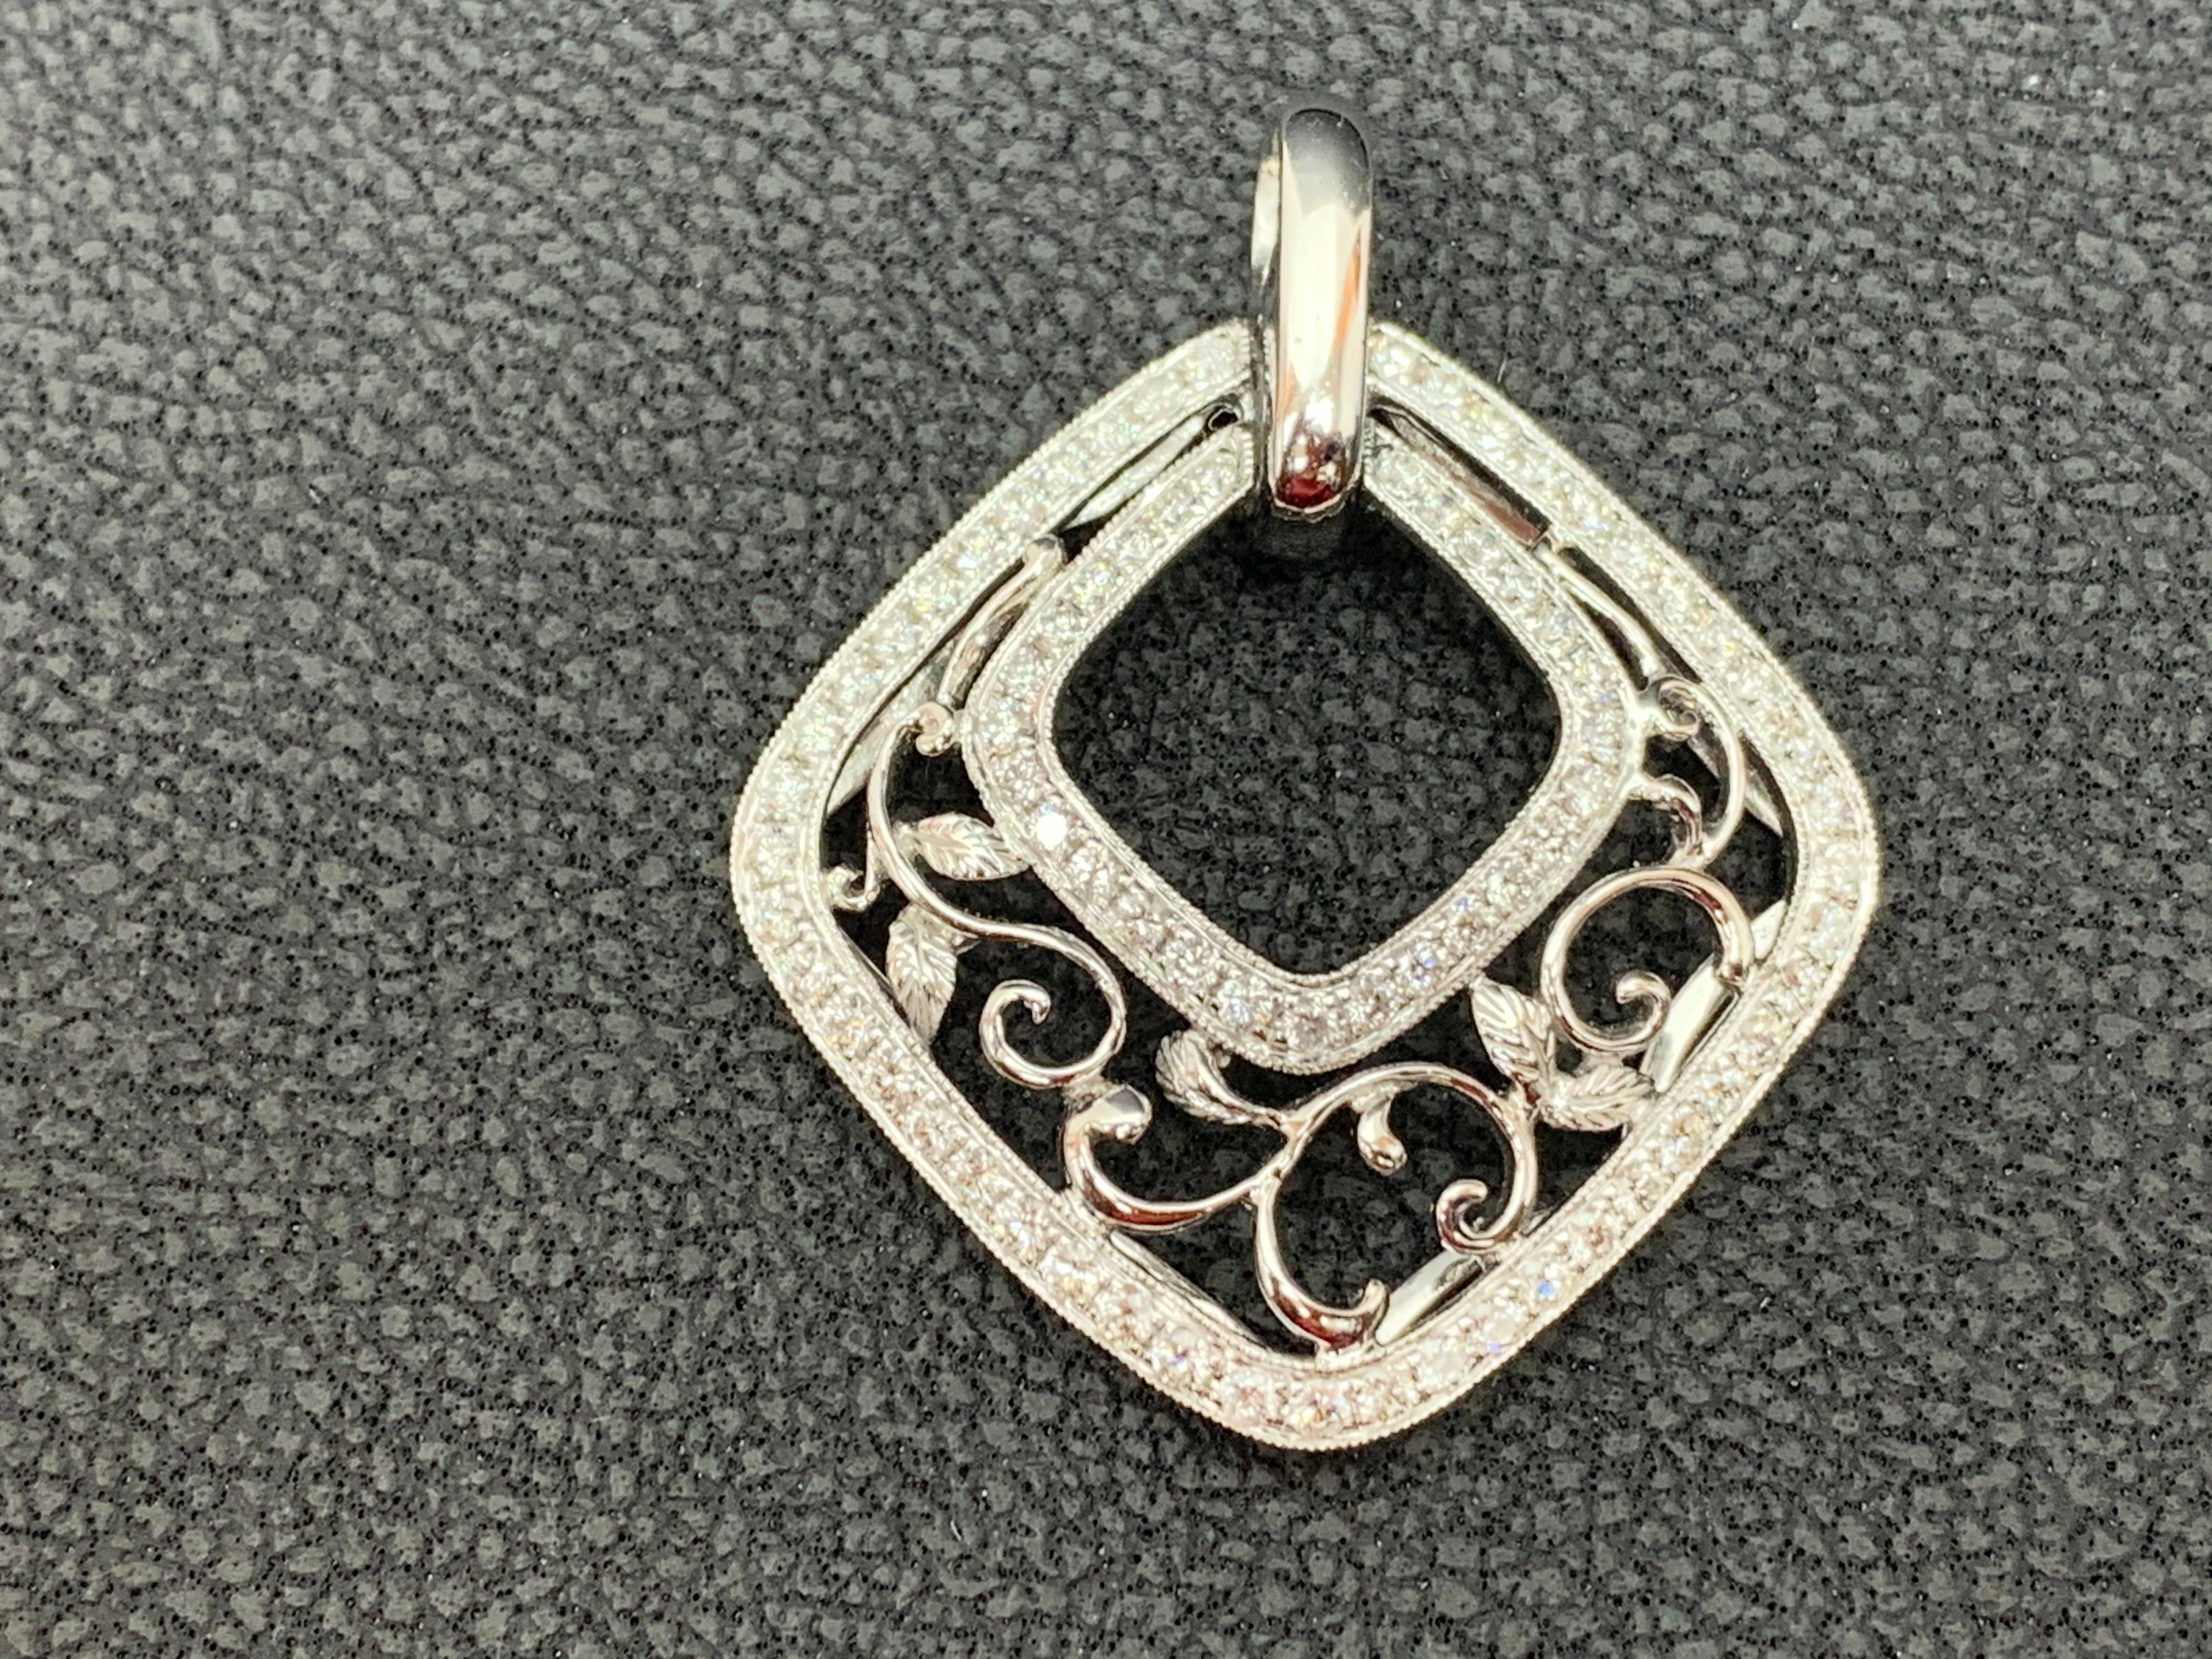 Showcases a Vintage style pendant of open-work design, encrusted by 74 round brilliant diamonds weighing 0.79 carats total. Pendant is in a three dimensional shape made in 18K White Gold.
18